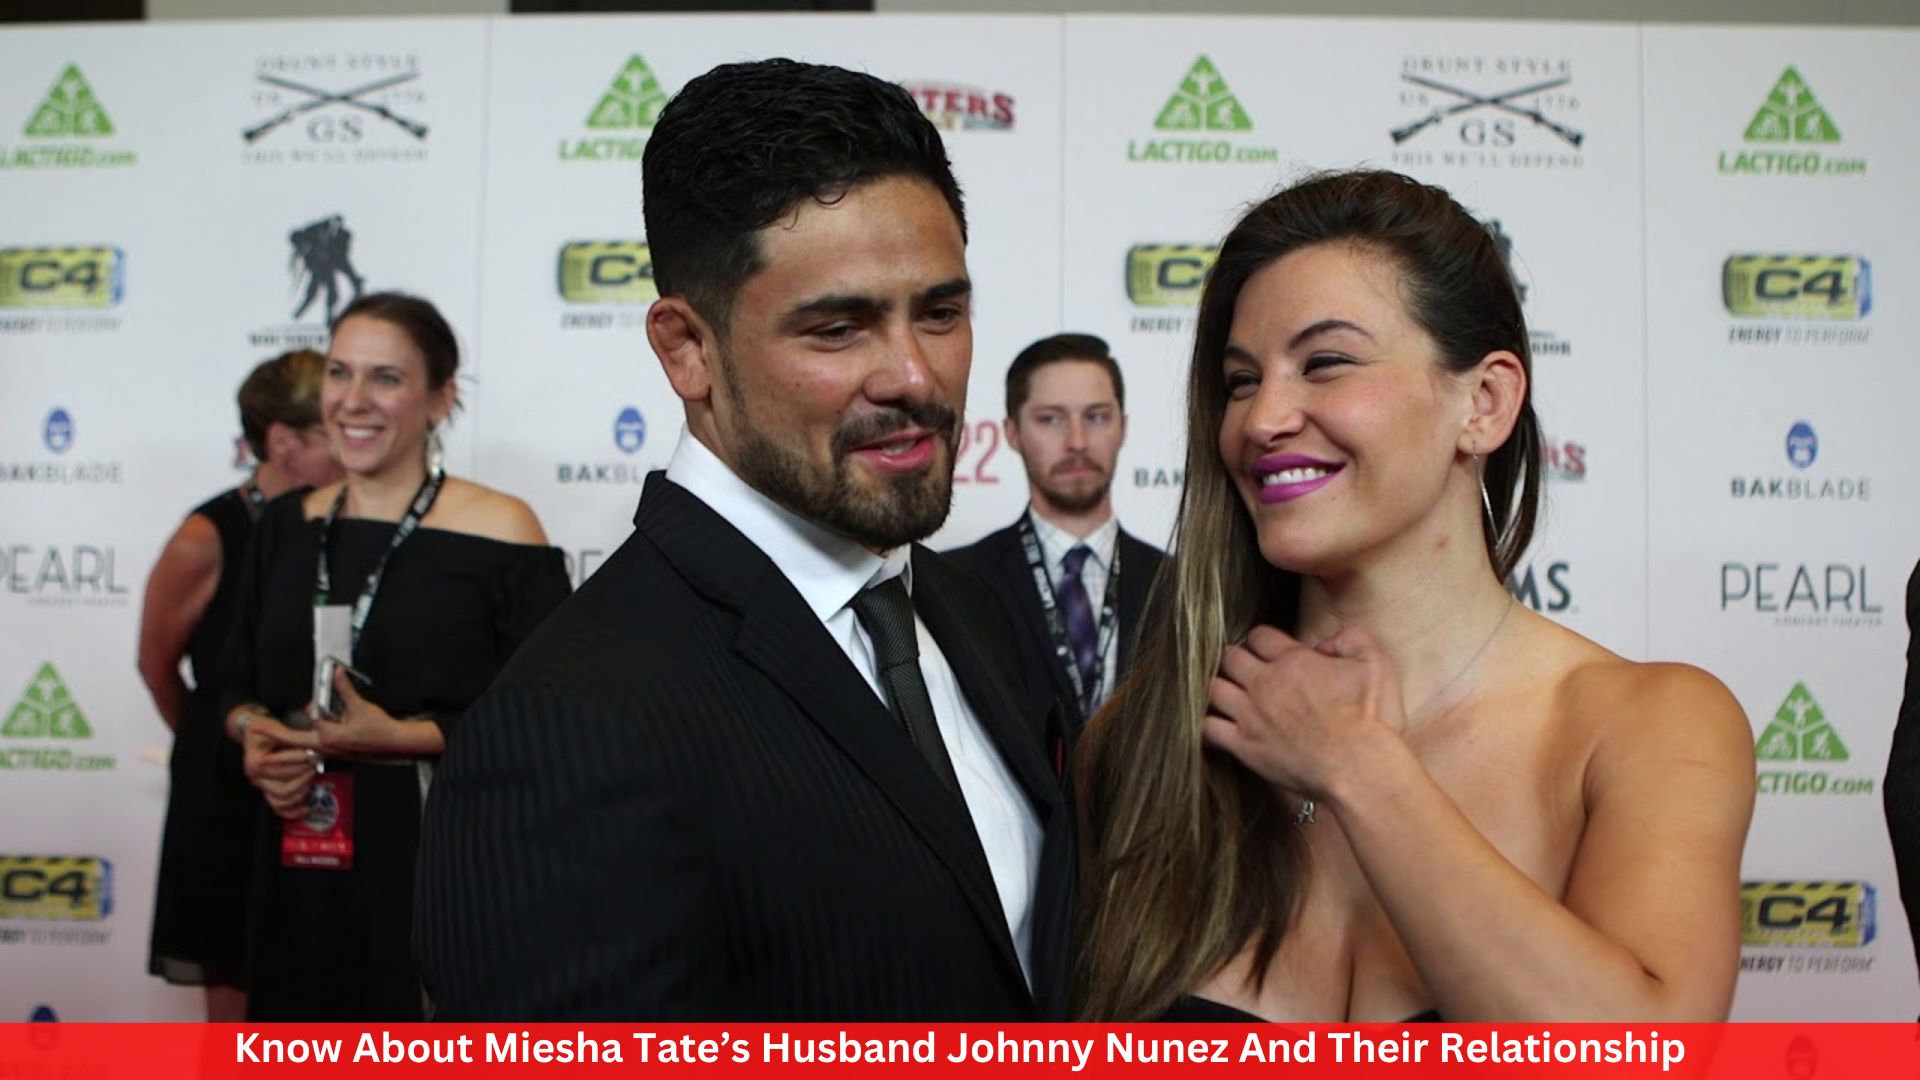 Know About Miesha Tate’s Husband Johnny Nunez And Their Relationship